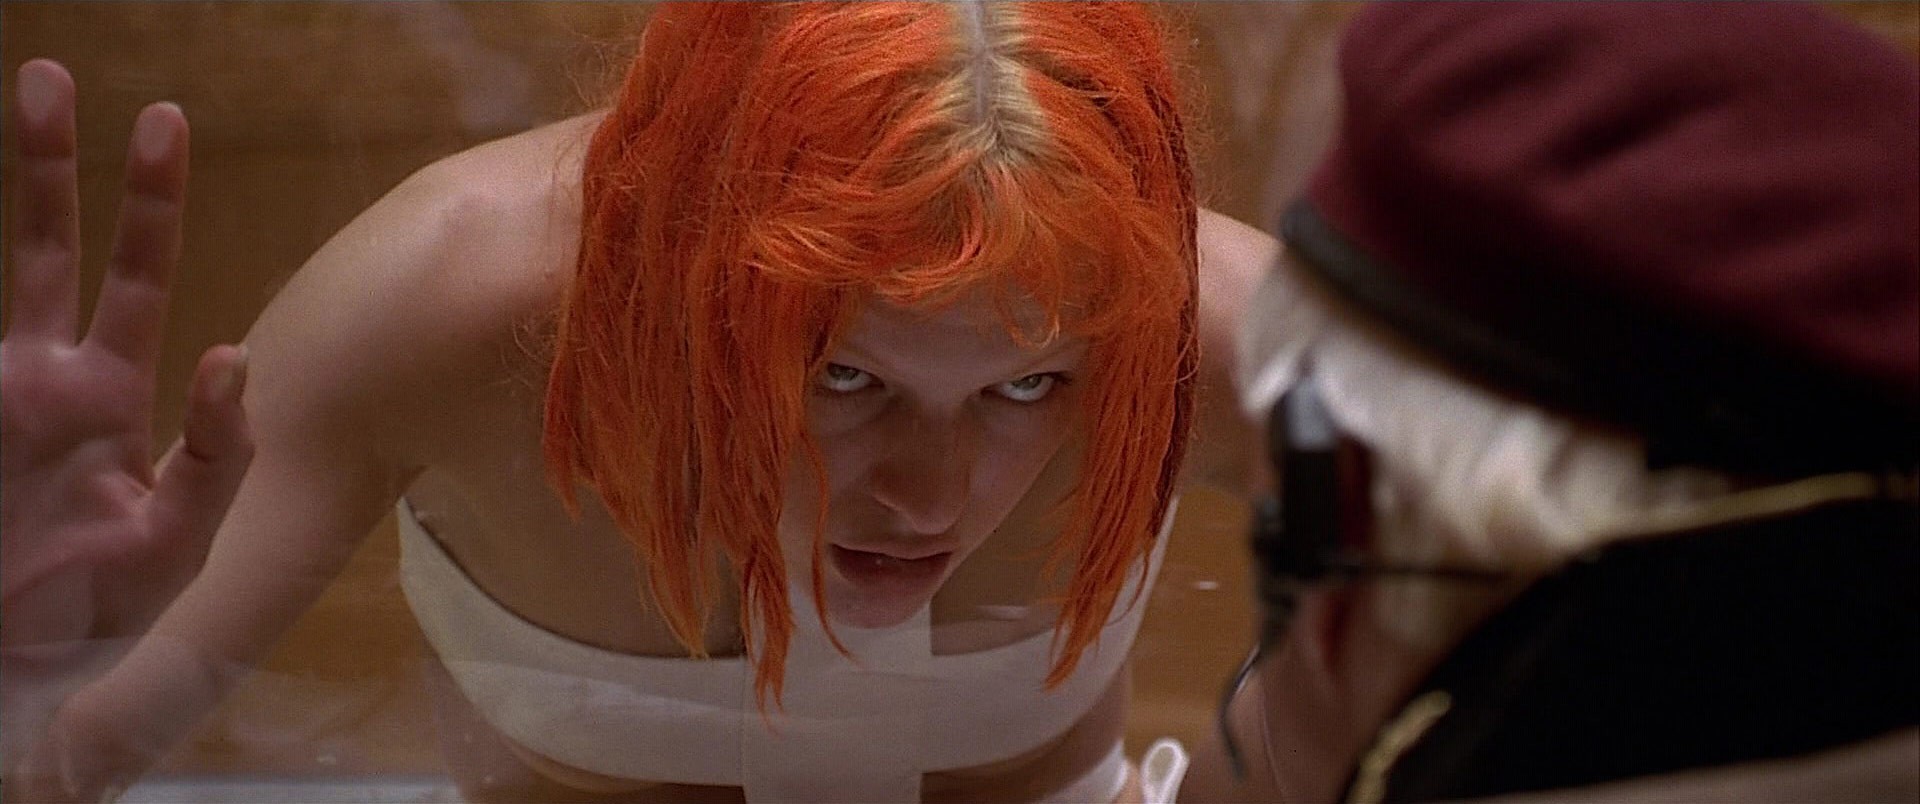 Nude photos Fifth Element The Milla Jovovich